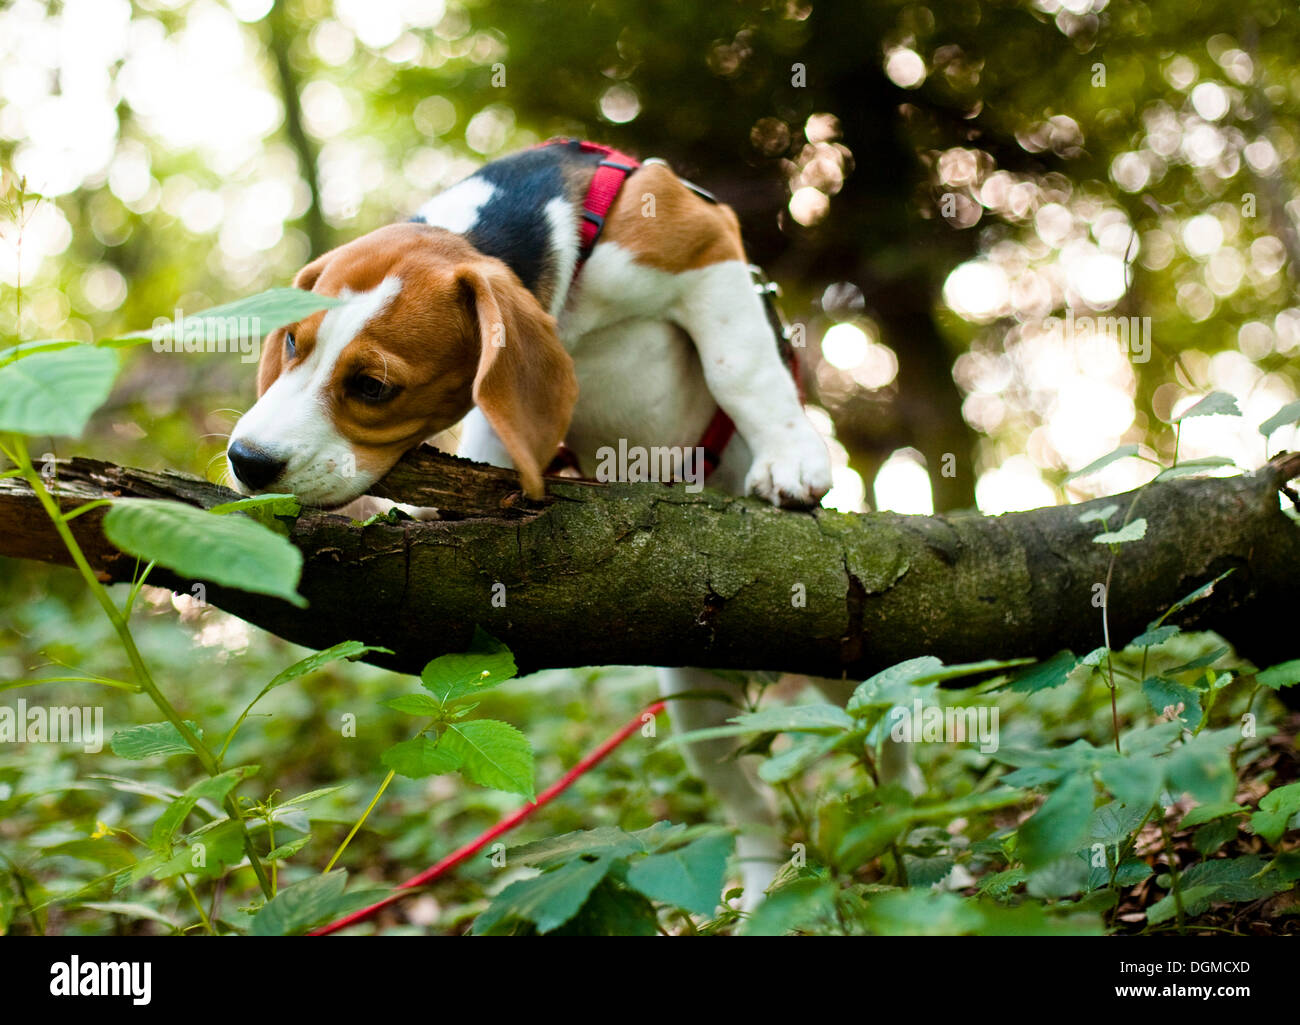 A tricolour male beagle puppy chewing on a tree trunk in the forest Stock Photo